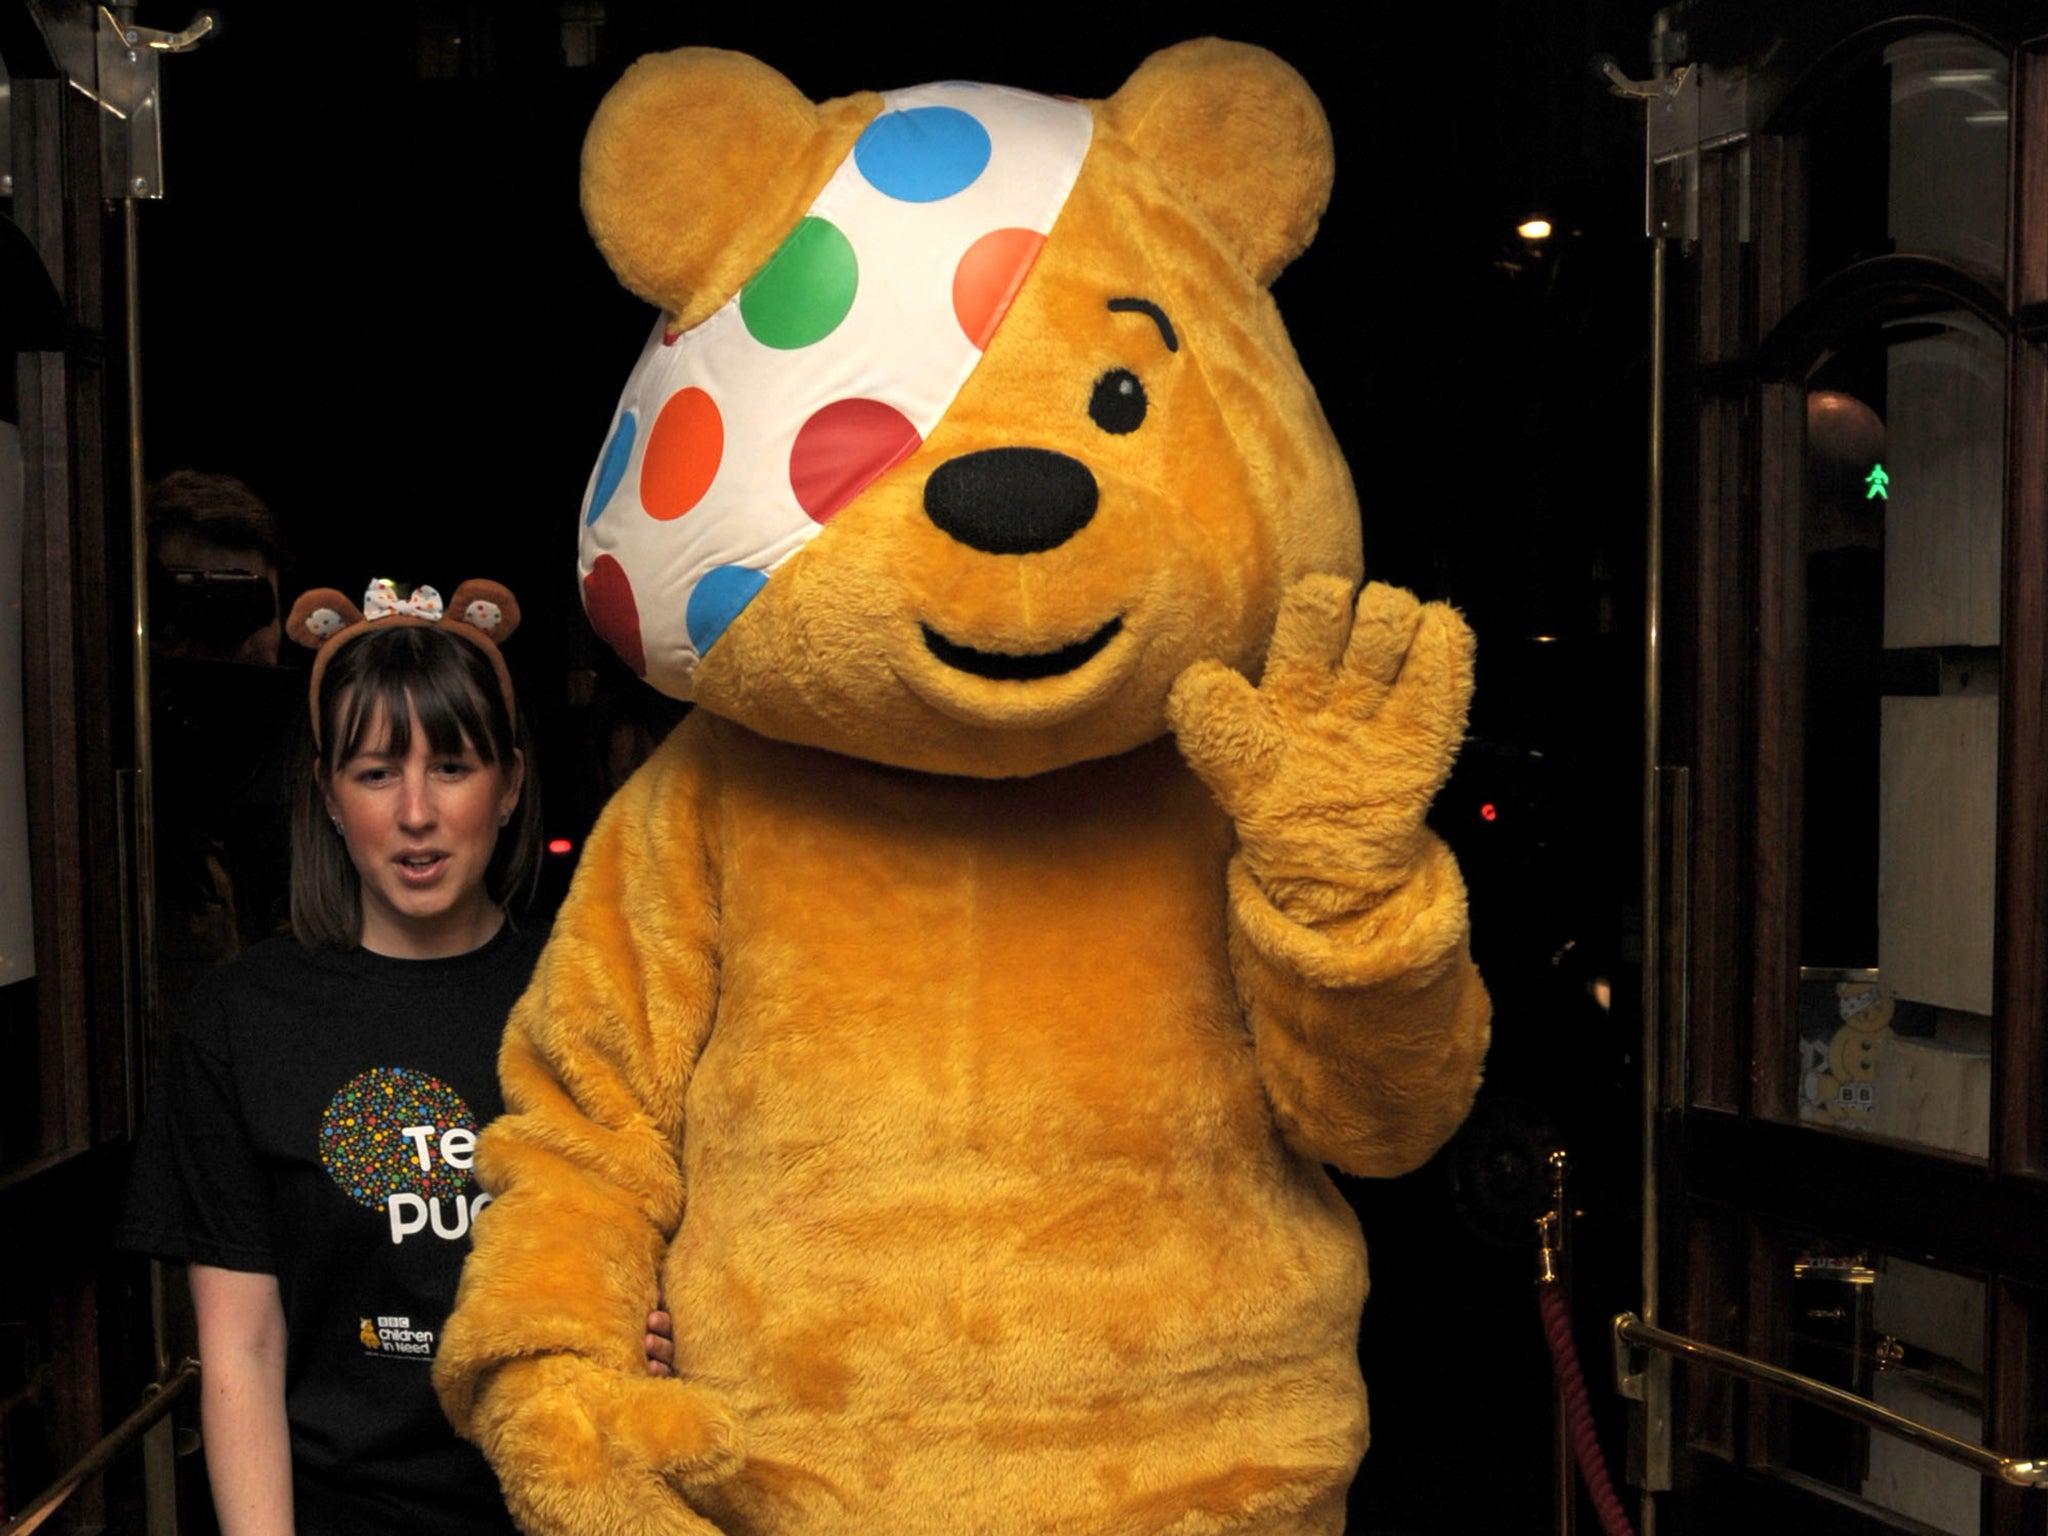 BBC Children in Need is the BBC's UK charity. Since 1980 it has raised over £600 million to change the lives of disabled children and young people in the UK